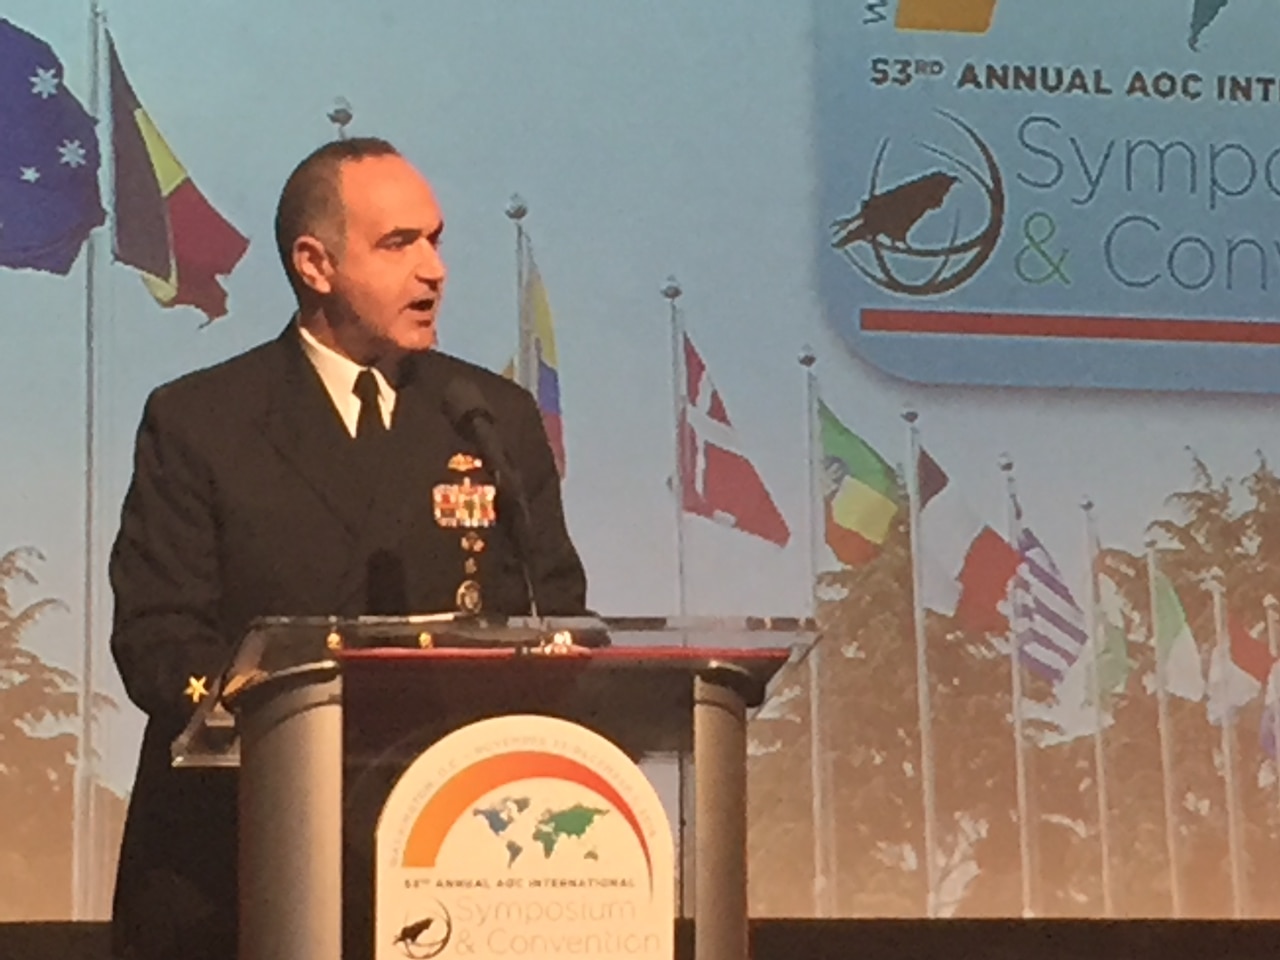 Navy Vice Adm. Charles A. Richard addresses the Defense Department’s progress in electromagnetic spectrum operations during remarks at the 53rd Annual Association of Old Crows International Symposium and Convention in Washington, Nov. 29, 2016. The event highlights critical issues related to national defense, asymmetric warfare capabilities and the electronic warfare community. DoD photo by Amaani Lyle